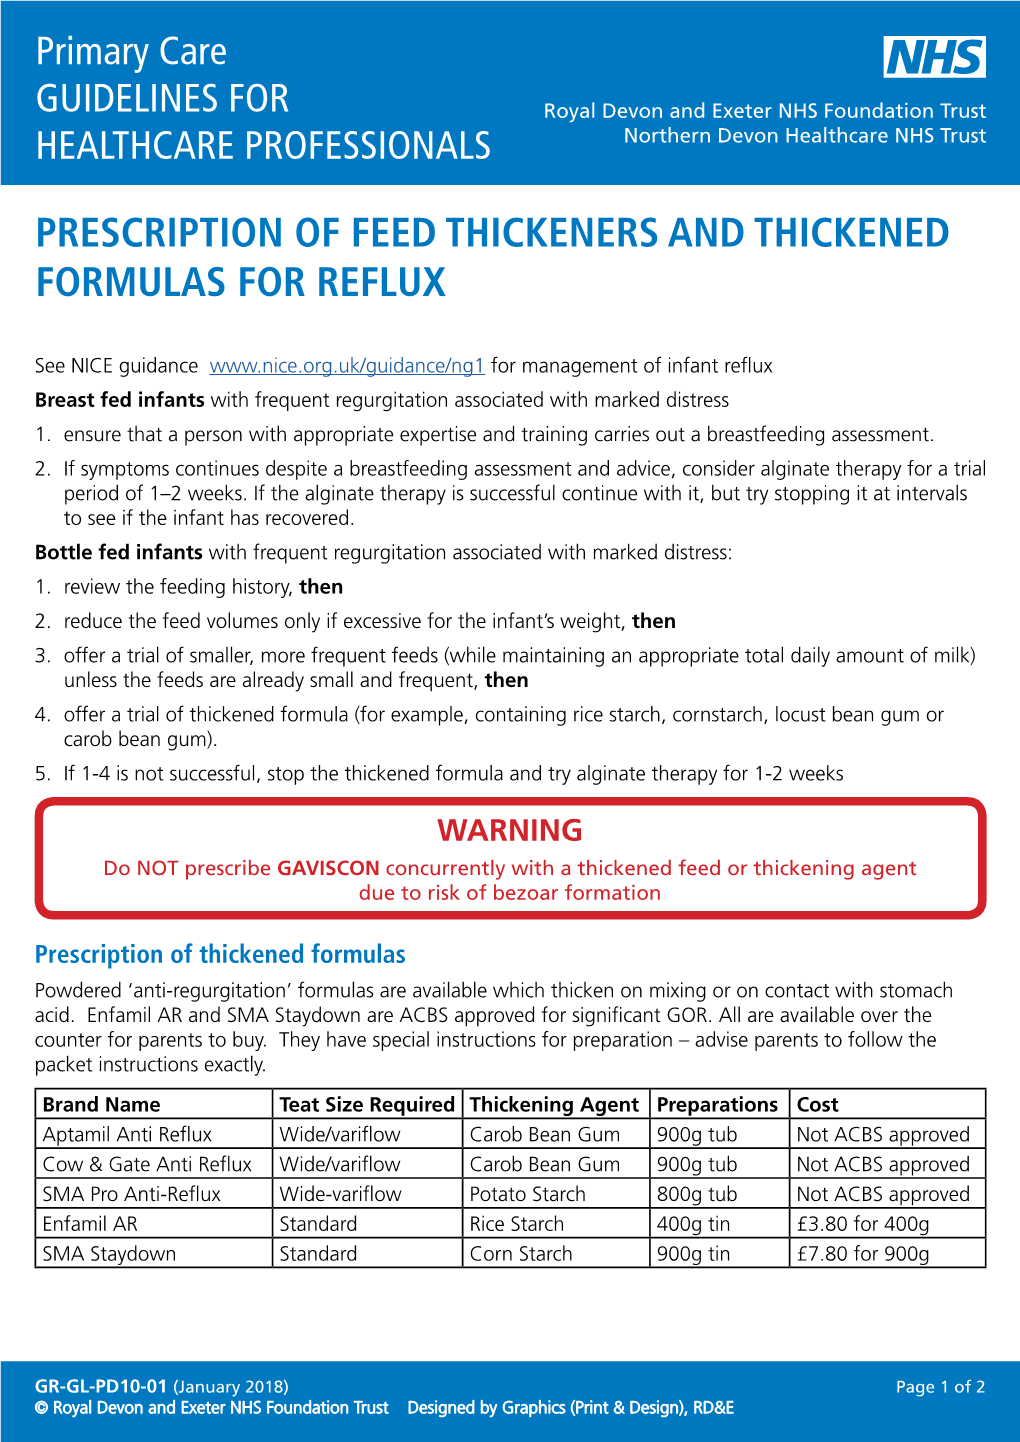 Prescription of Feed Thickeners and Thickened Formulas for Reflux (GR-GL-PD10-01)